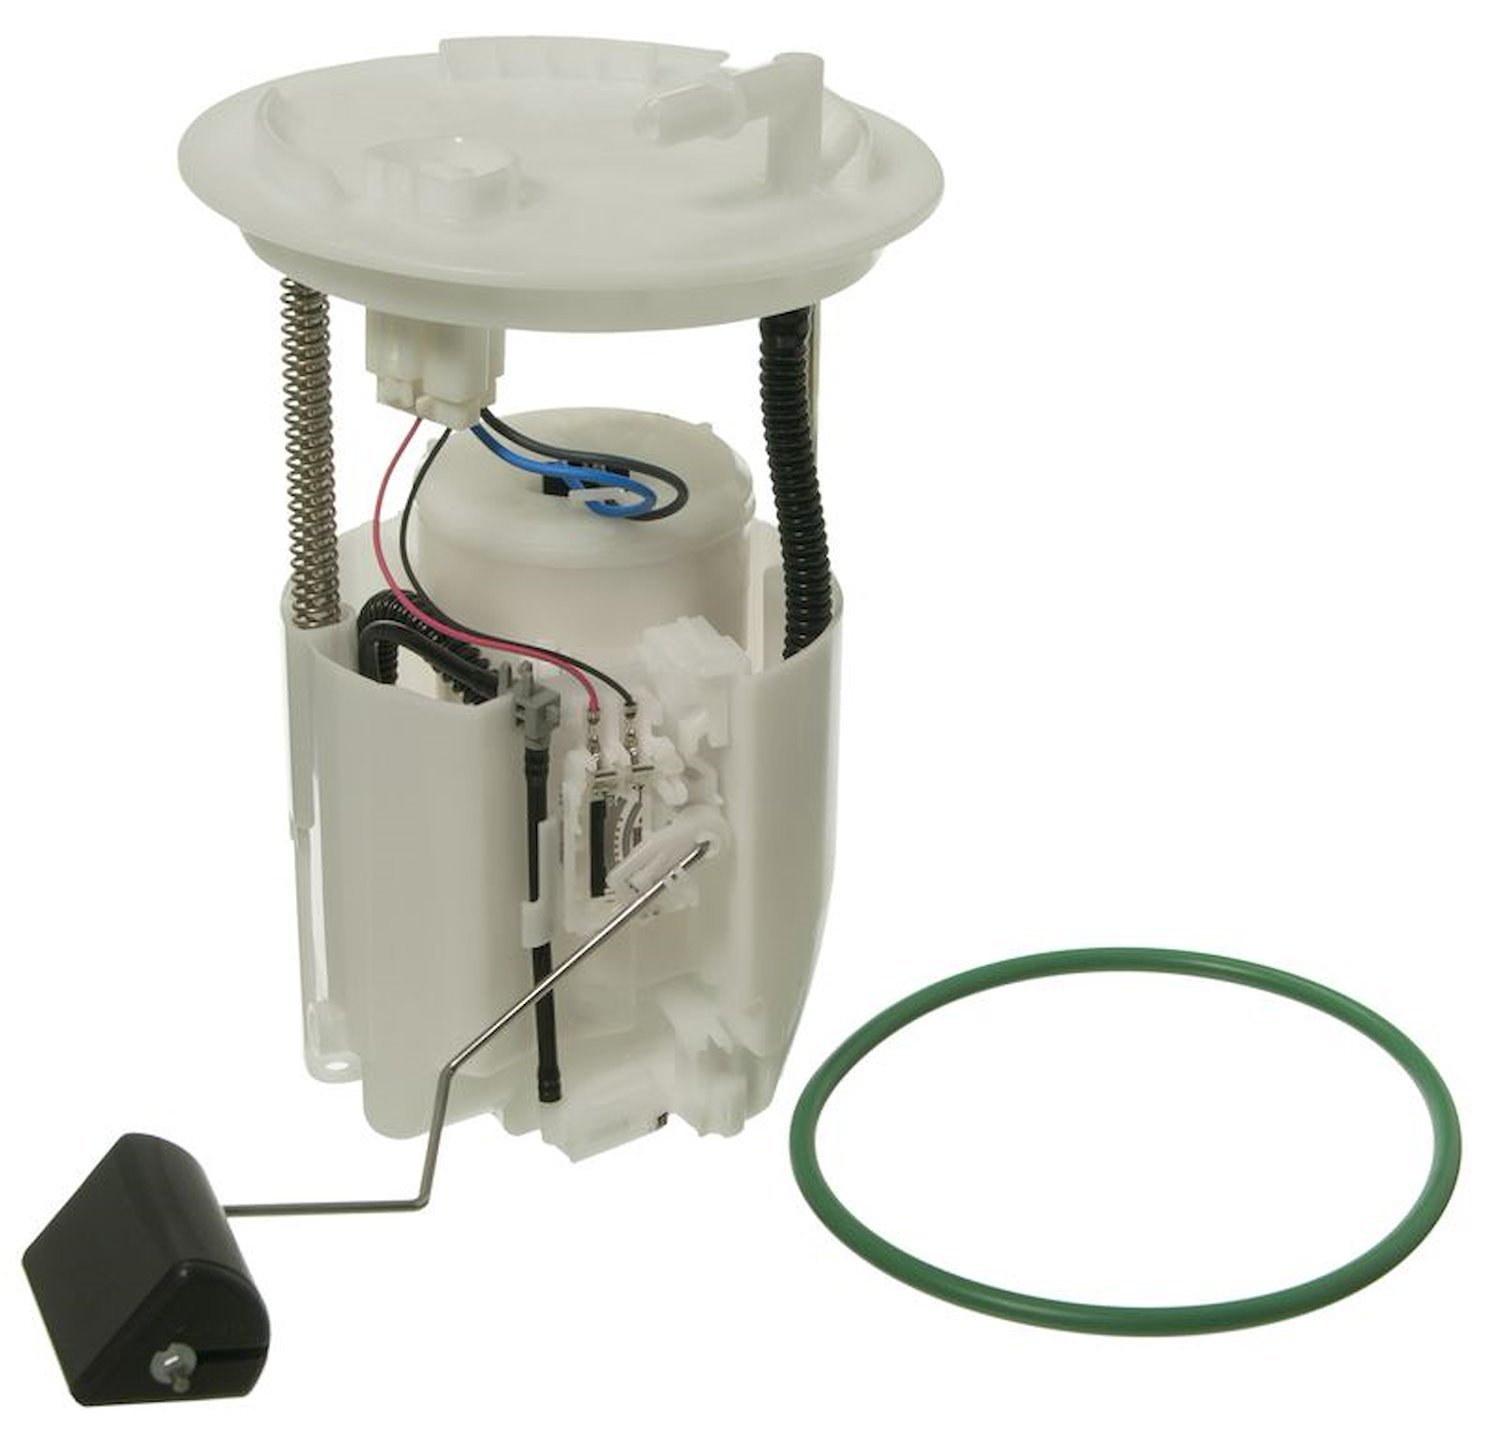 OE Ford/Lincoln Replacement Fuel Pump Module Assembly for 2007-2010 Ford Edge/Lincoln MKX